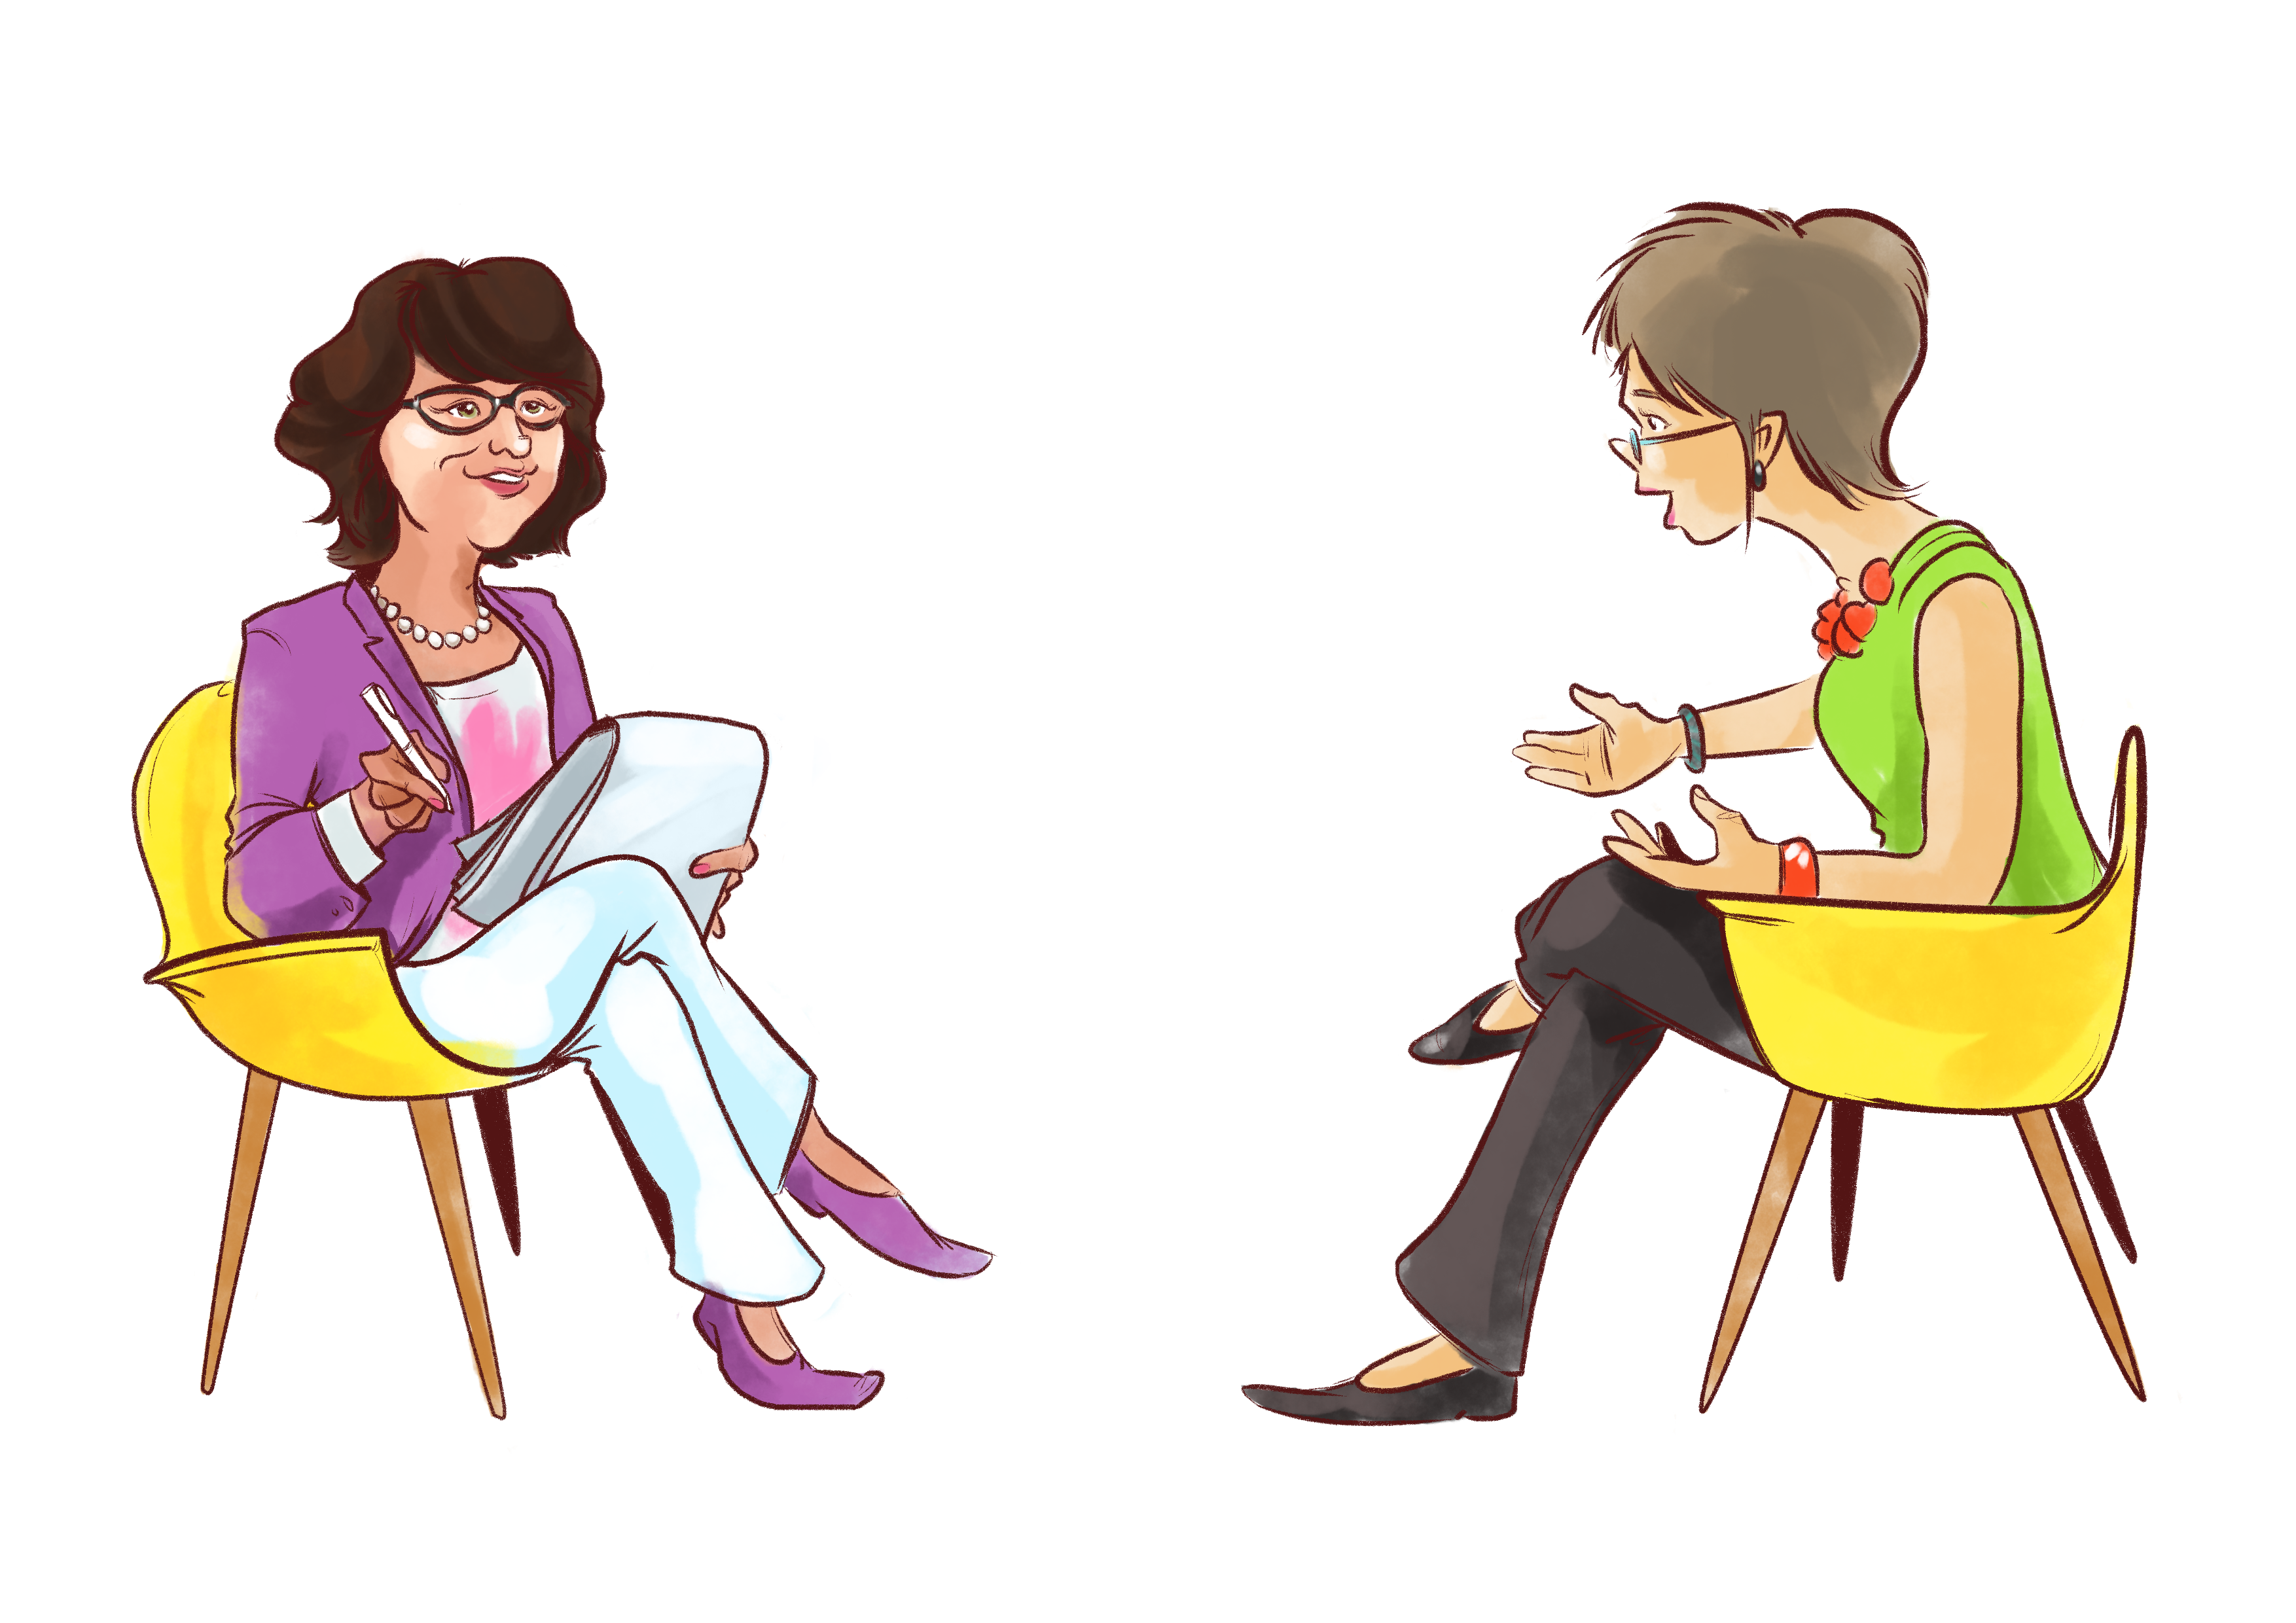 conversation clipart thinking together